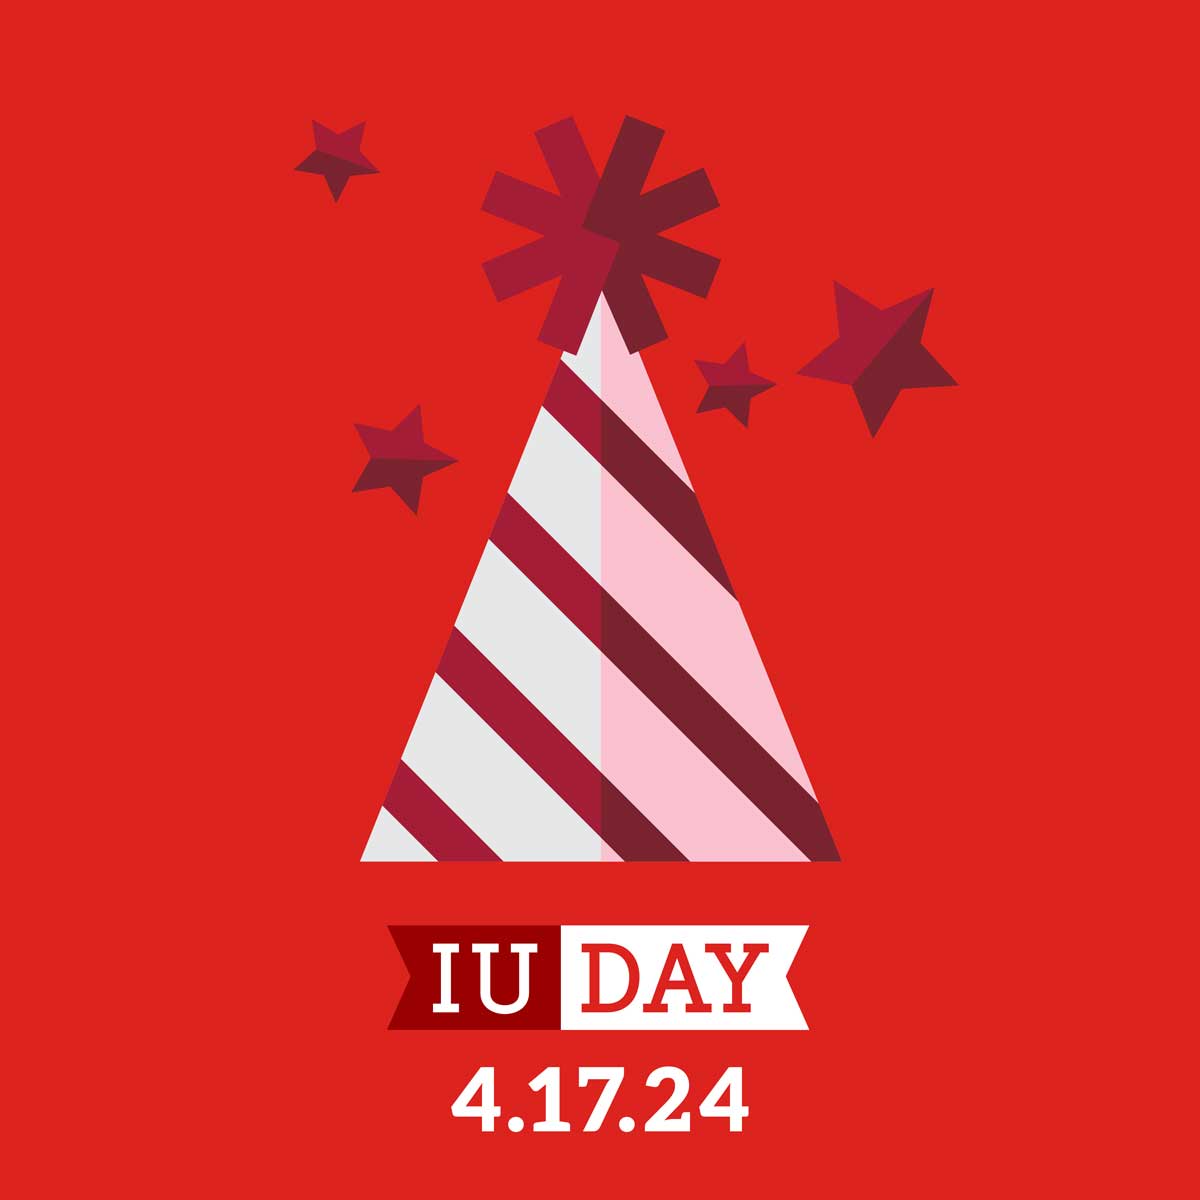 IU Day is a one week away! IU Day is about sharing the IU love—so we're giving you a heads up that we'd love to see your IU or @IUMaurerLaw spirit this year! Post a selfie in IU gear or give a shout-out to your favorite professor! Don't forget the #IUday! See you in a week! 📷